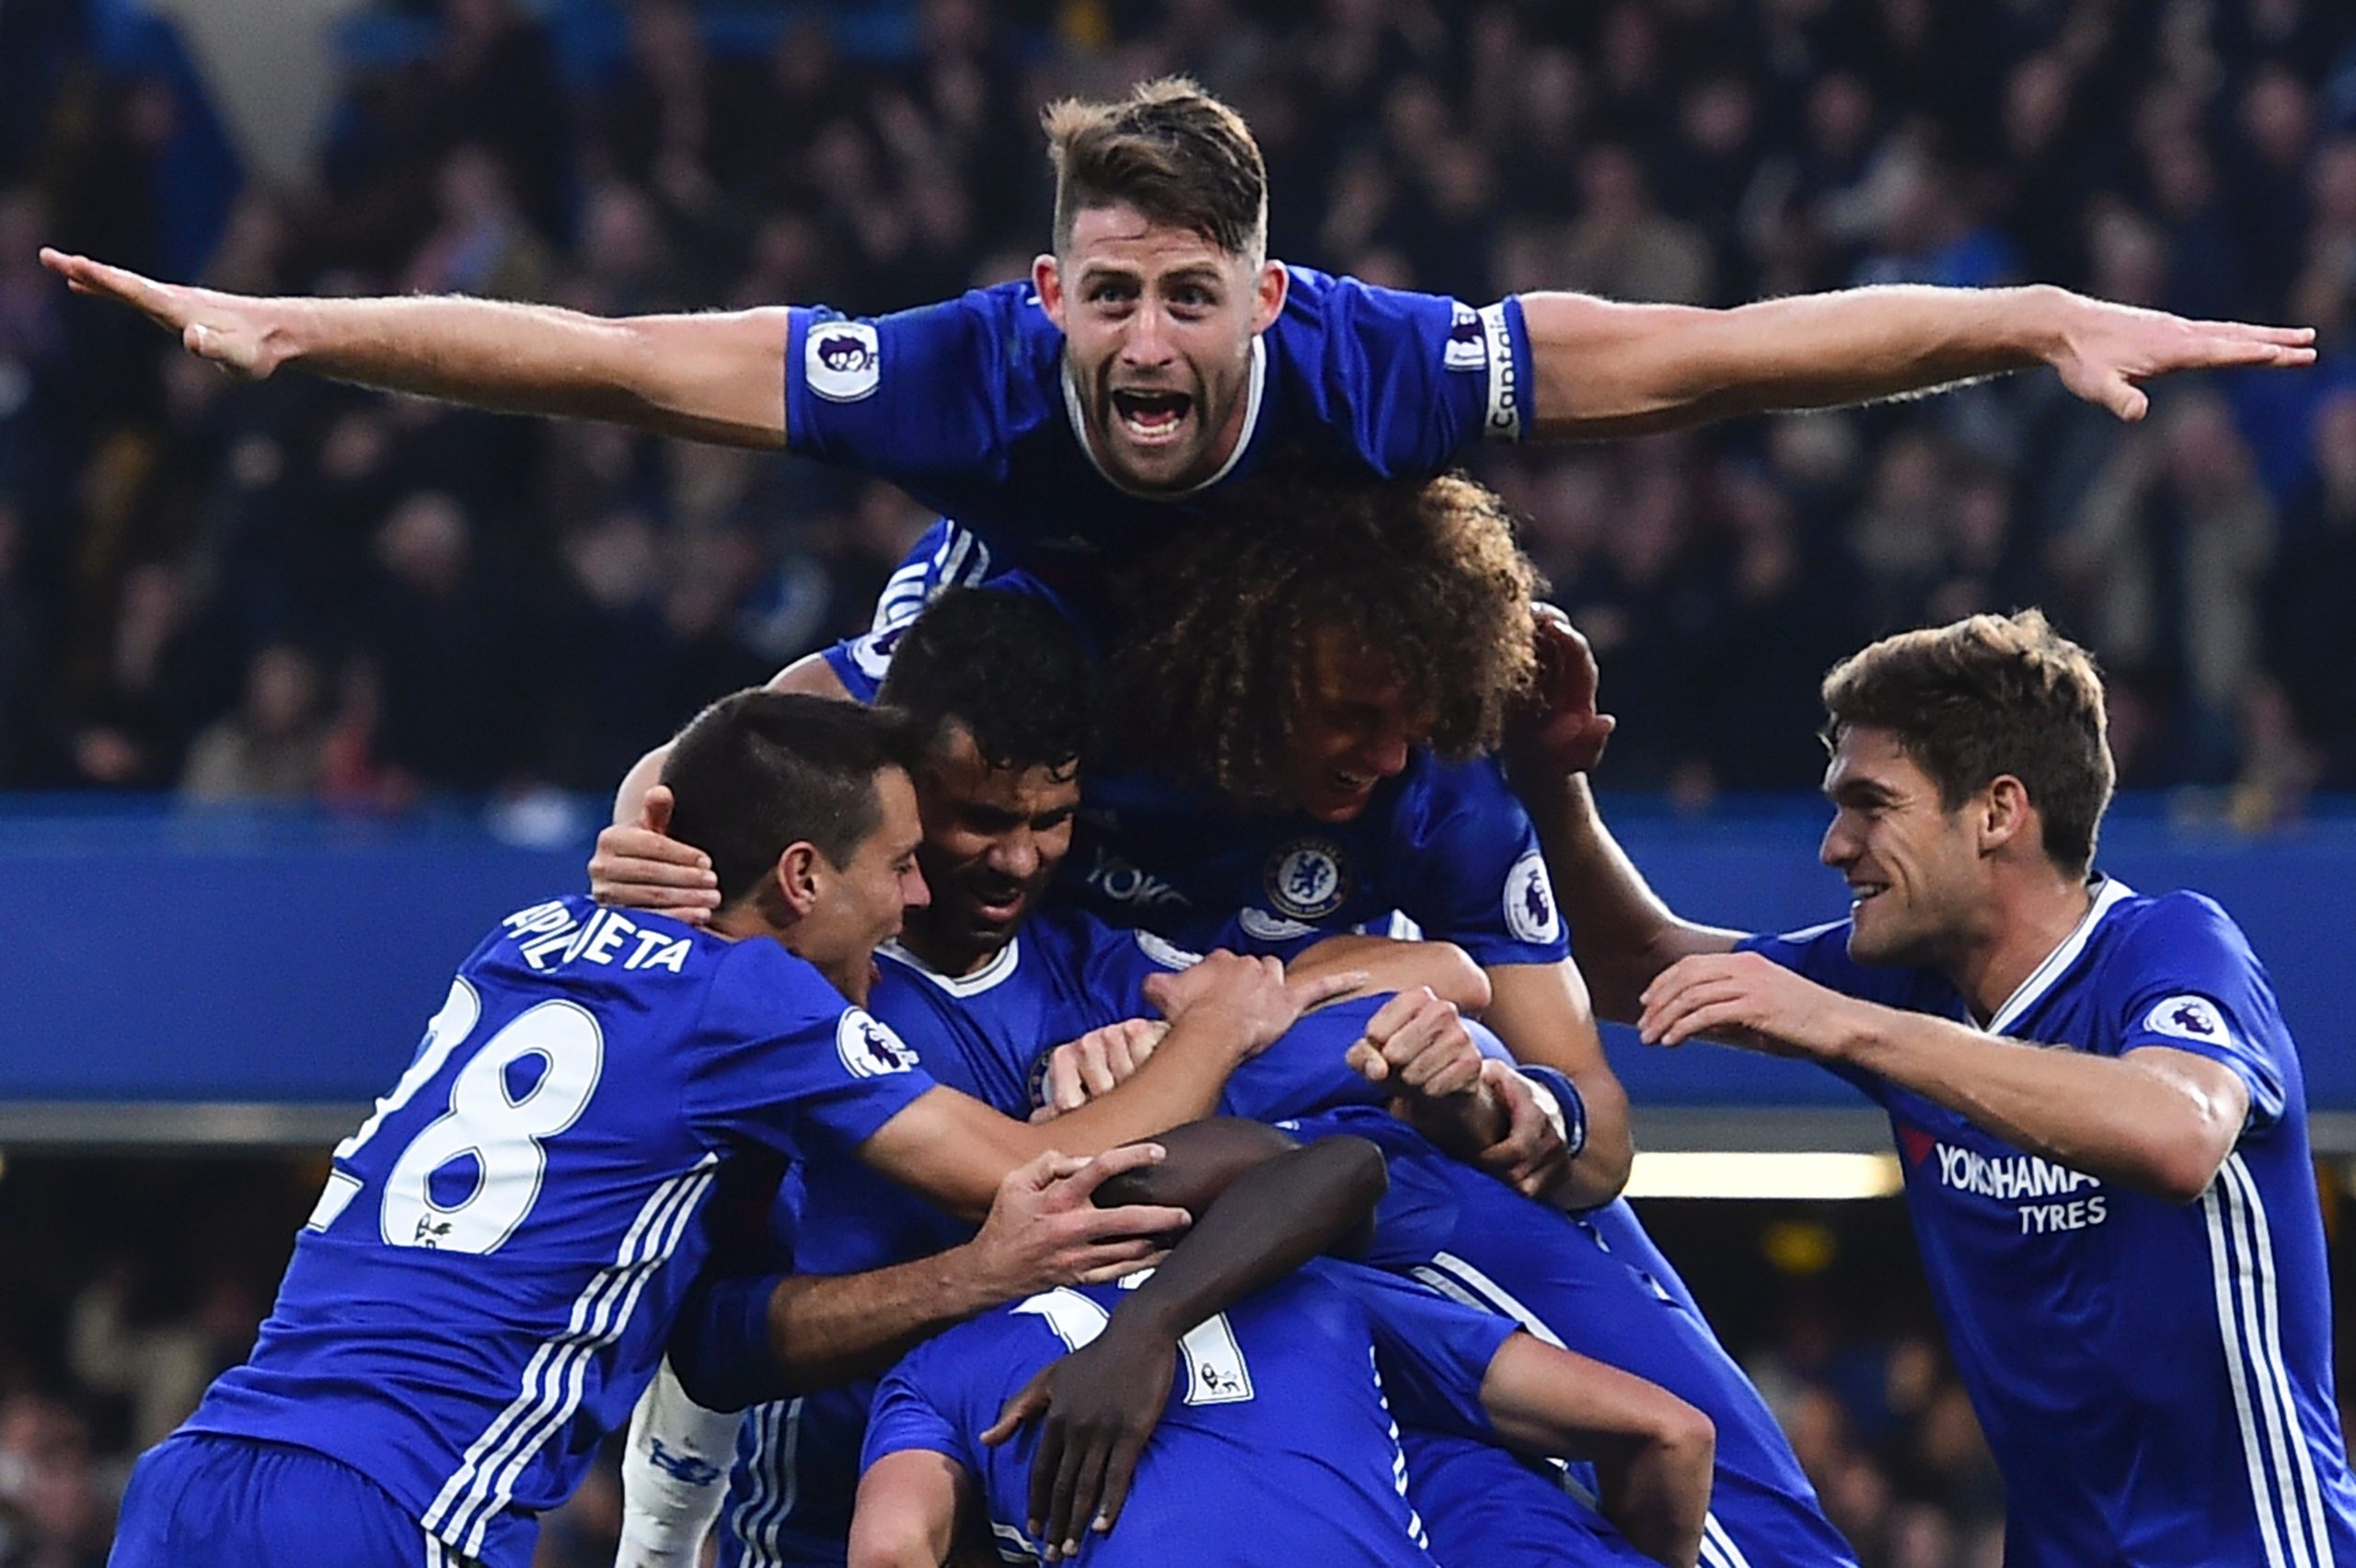 Chelsea's English defender Gary Cahill (top) jumps onto the huddle to join the celebrates after Chelsea's French midfielder N'Golo Kante scored their fourth goal during the English Premier League football match between Chelsea and Manchester United at Stamford Bridge in London on October 23, 2016. / AFP / GLYN KIRK / RESTRICTED TO EDITORIAL USE. No use with unauthorized audio, video, data, fixture lists, club/league logos or 'live' services. Online in-match use limited to 75 images, no video emulation. No use in betting, games or single club/league/player publications.  /         (Photo credit should read GLYN KIRK/AFP/Getty Images)